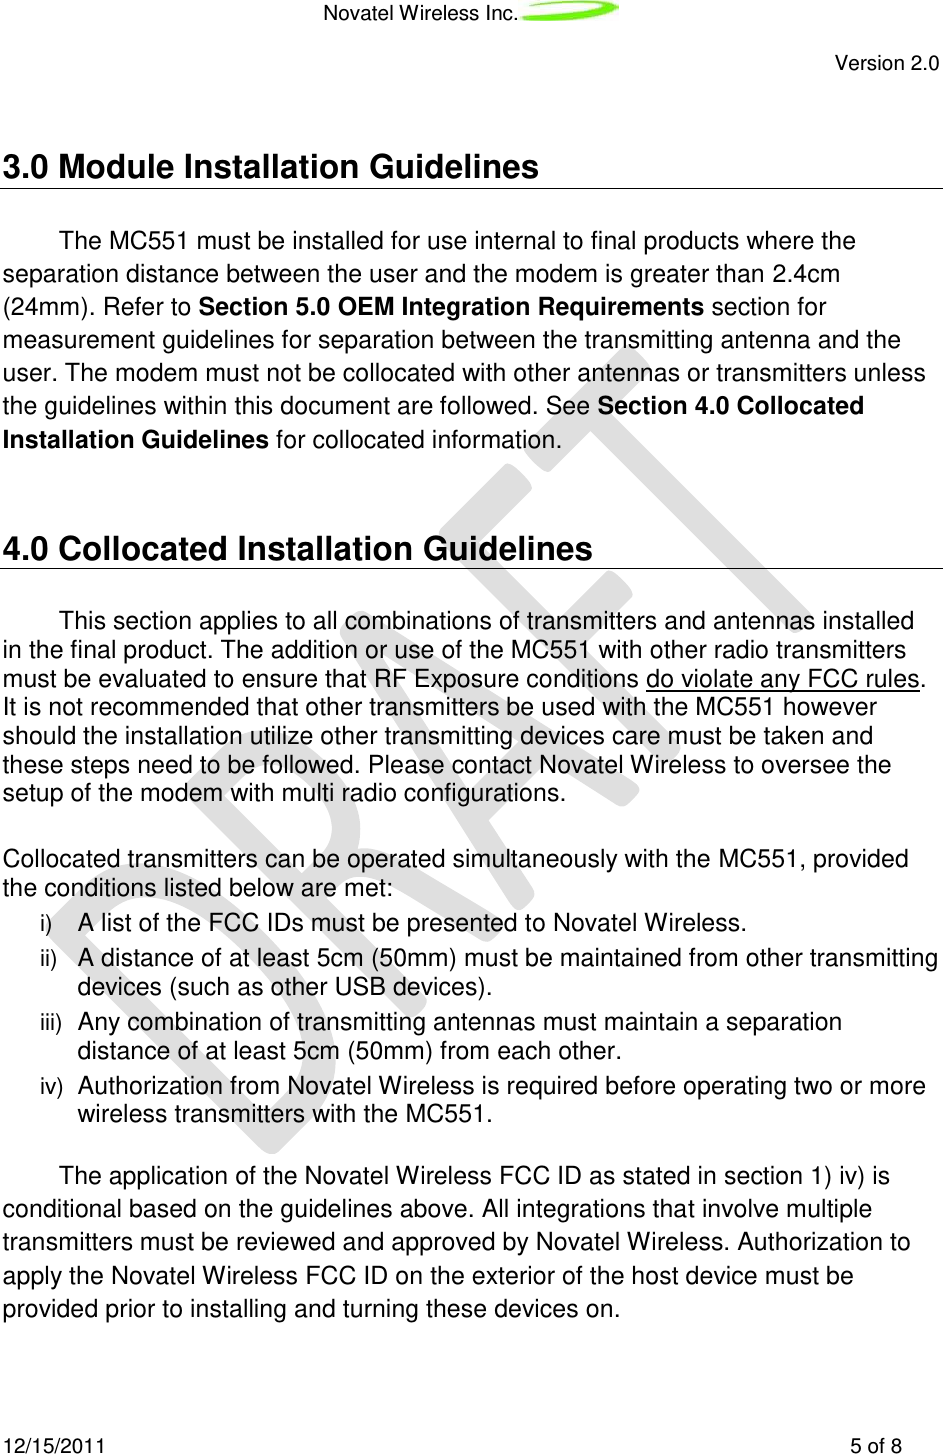 Novatel Wireless Inc.   Version 2.0 12/15/2011    5 of 8  3.0 Module Installation Guidelines The MC551 must be installed for use internal to final products where the separation distance between the user and the modem is greater than 2.4cm (24mm). Refer to Section 5.0 OEM Integration Requirements section for measurement guidelines for separation between the transmitting antenna and the user. The modem must not be collocated with other antennas or transmitters unless the guidelines within this document are followed. See Section 4.0 Collocated Installation Guidelines for collocated information.  4.0 Collocated Installation Guidelines This section applies to all combinations of transmitters and antennas installed in the final product. The addition or use of the MC551 with other radio transmitters must be evaluated to ensure that RF Exposure conditions do violate any FCC rules. It is not recommended that other transmitters be used with the MC551 however should the installation utilize other transmitting devices care must be taken and these steps need to be followed. Please contact Novatel Wireless to oversee the setup of the modem with multi radio configurations.  Collocated transmitters can be operated simultaneously with the MC551, provided the conditions listed below are met:  i) A list of the FCC IDs must be presented to Novatel Wireless.  ii) A distance of at least 5cm (50mm) must be maintained from other transmitting devices (such as other USB devices).  iii) Any combination of transmitting antennas must maintain a separation distance of at least 5cm (50mm) from each other.  iv)  Authorization from Novatel Wireless is required before operating two or more wireless transmitters with the MC551.   The application of the Novatel Wireless FCC ID as stated in section 1) iv) is conditional based on the guidelines above. All integrations that involve multiple transmitters must be reviewed and approved by Novatel Wireless. Authorization to apply the Novatel Wireless FCC ID on the exterior of the host device must be provided prior to installing and turning these devices on.   